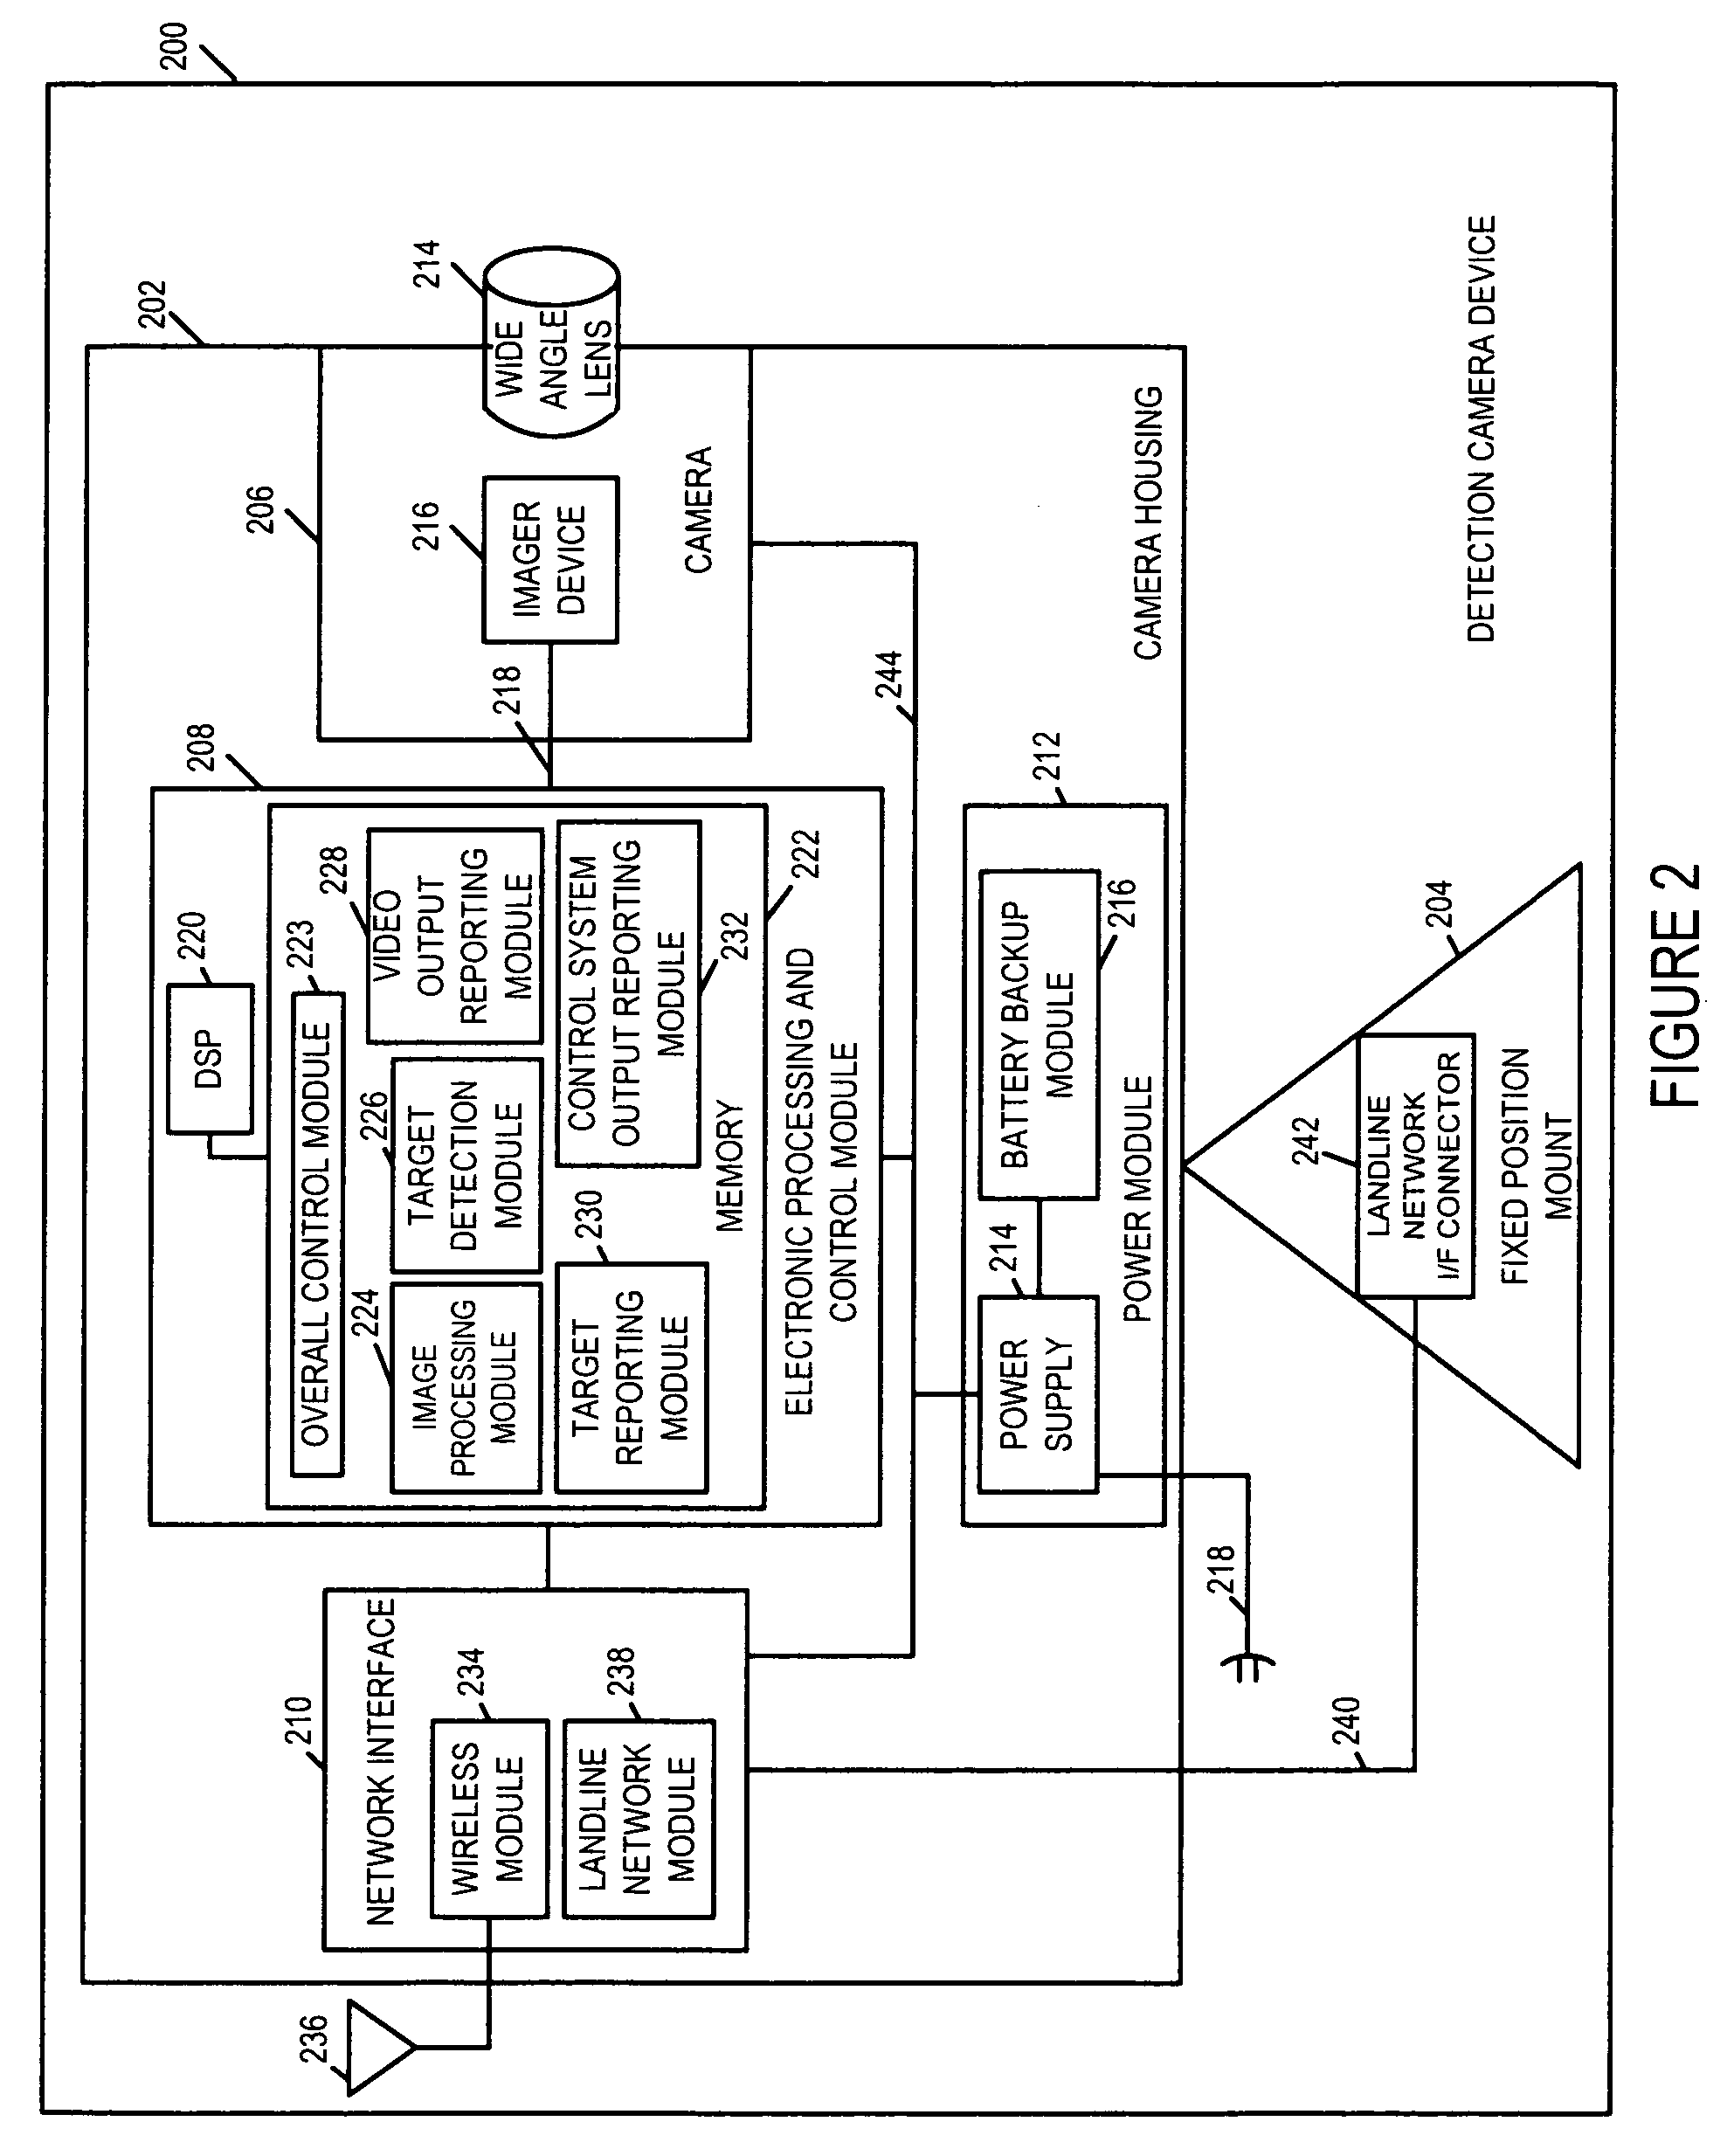 Methods and apparatus for a wide area coordinated surveillance system